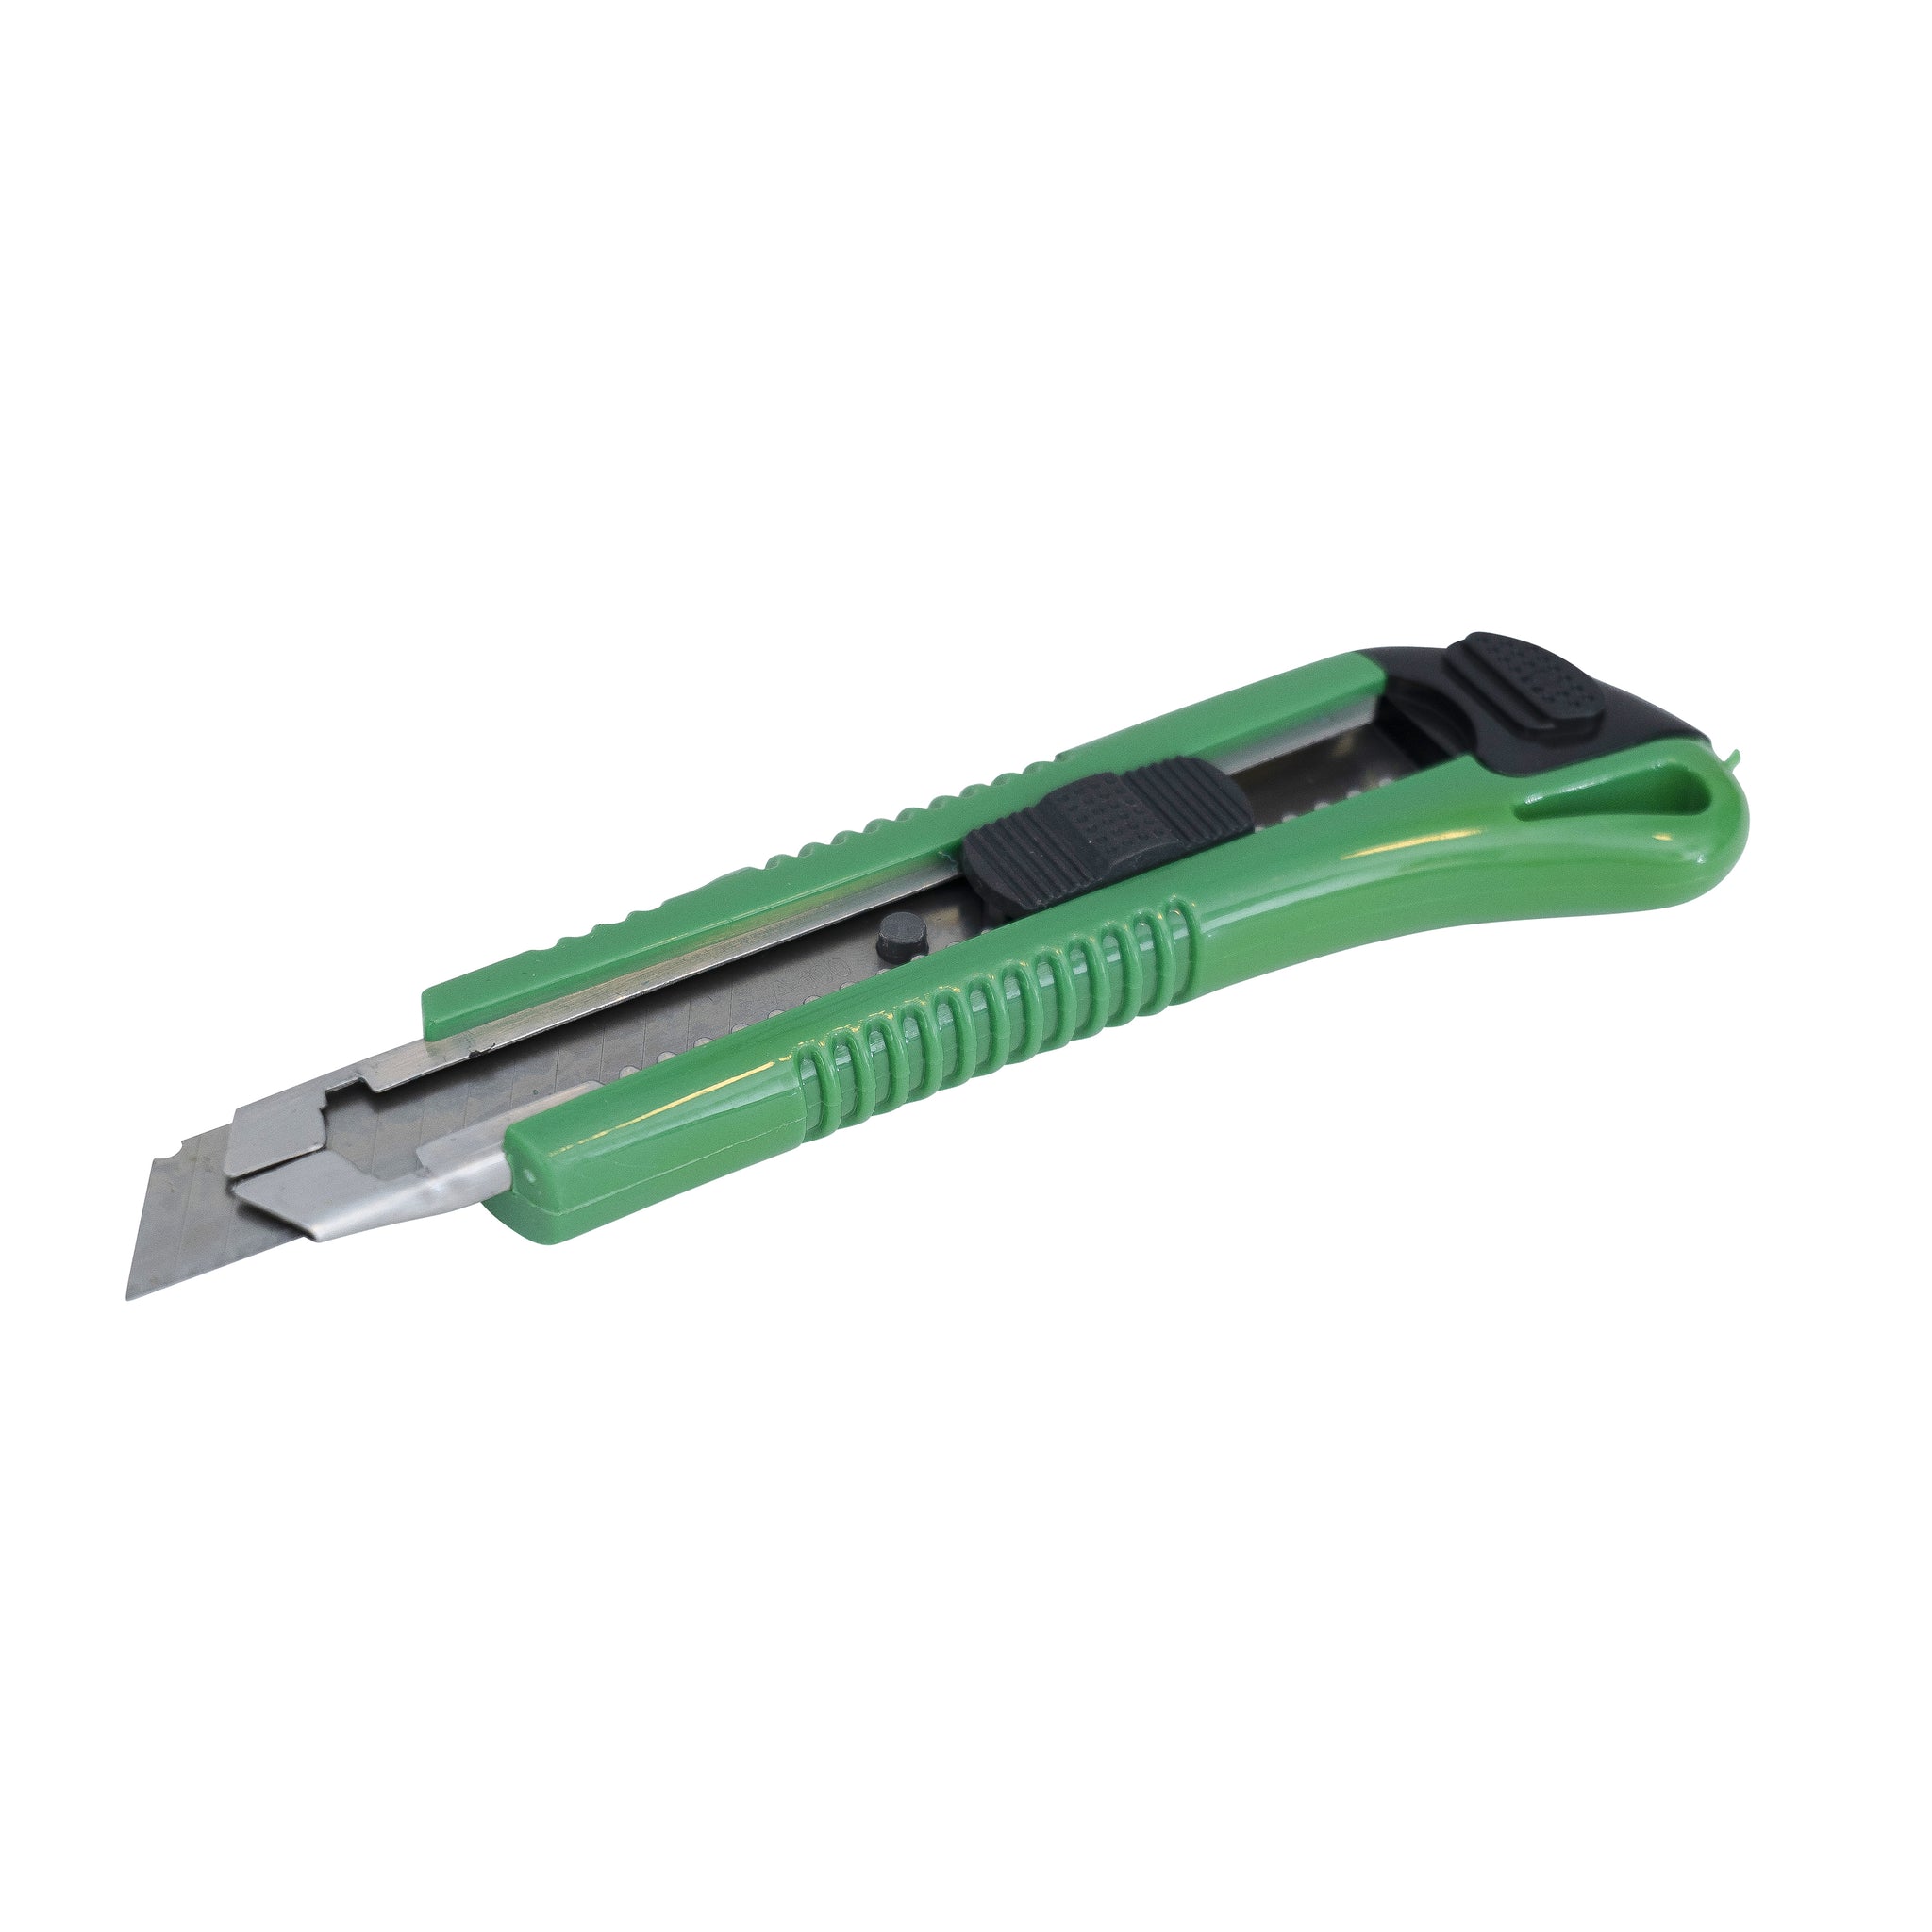 Utility Knife, Retractable Box Cutter for Cardboard, Boxes and Cartons, Non-Slip Rubbery Handle